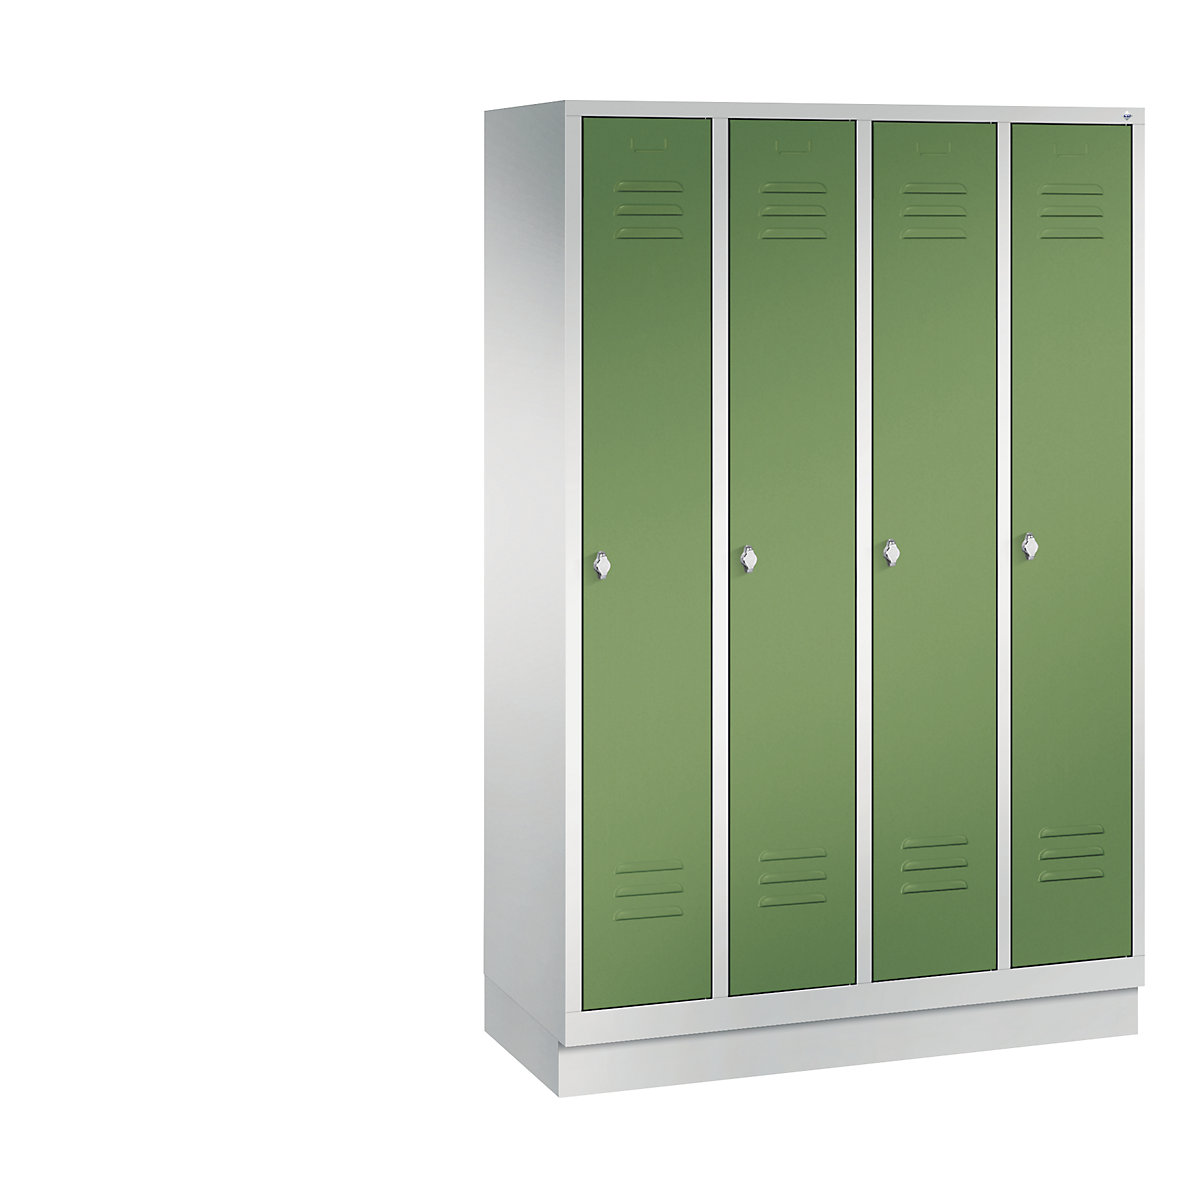 CLASSIC cloakroom locker with plinth – C+P, 4 compartments, compartment width 300 mm, light grey / reseda green-9